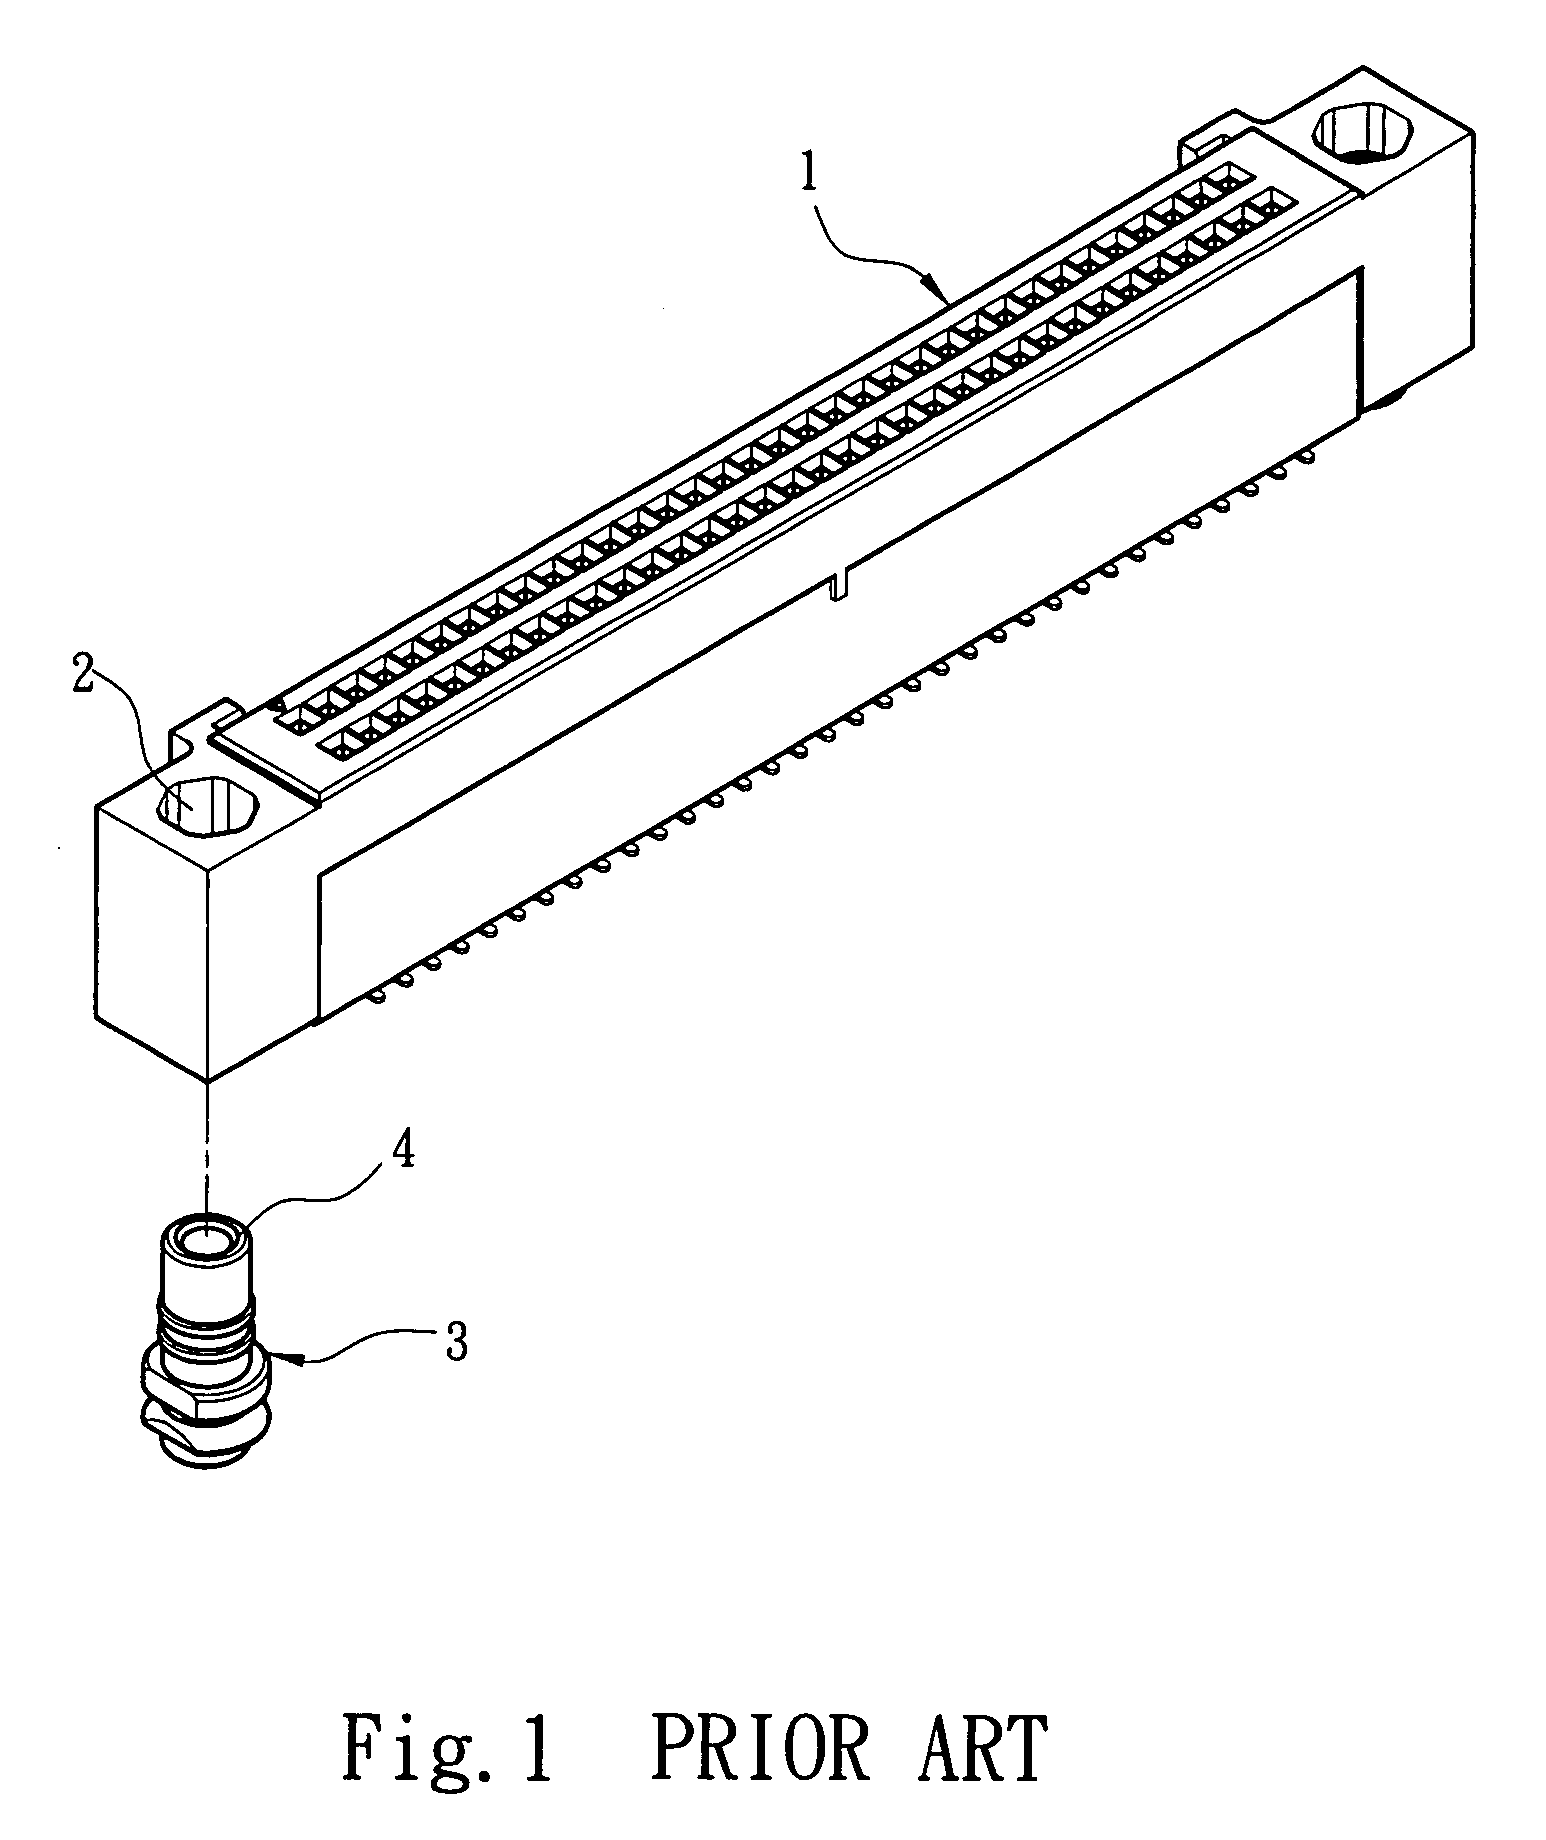 Anchor structure for electronic card connectors